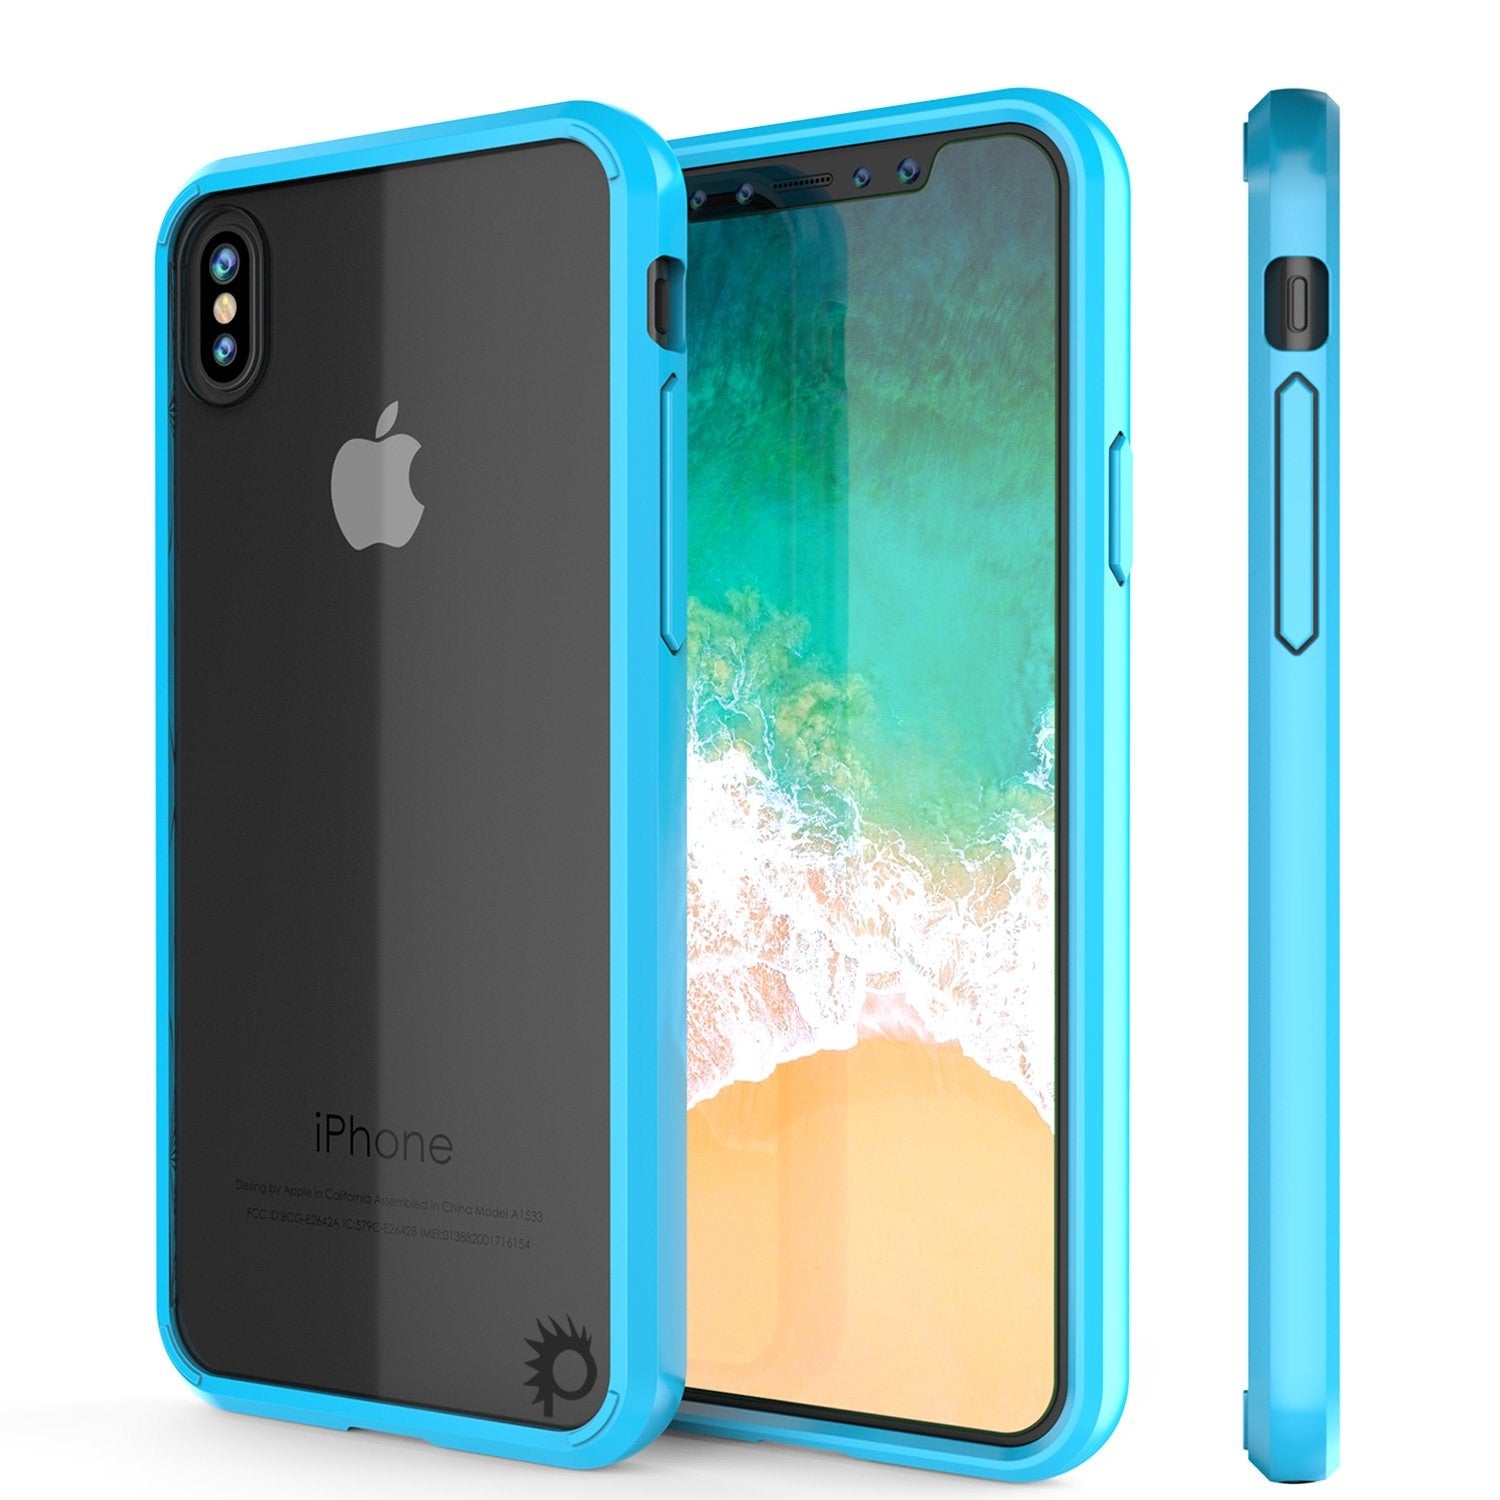 iPhone X Case, PUNKcase [LUCID 2.0 Series] [Slim Fit] Armor Cover W/Integrated Anti-Shock System [Light Blue]